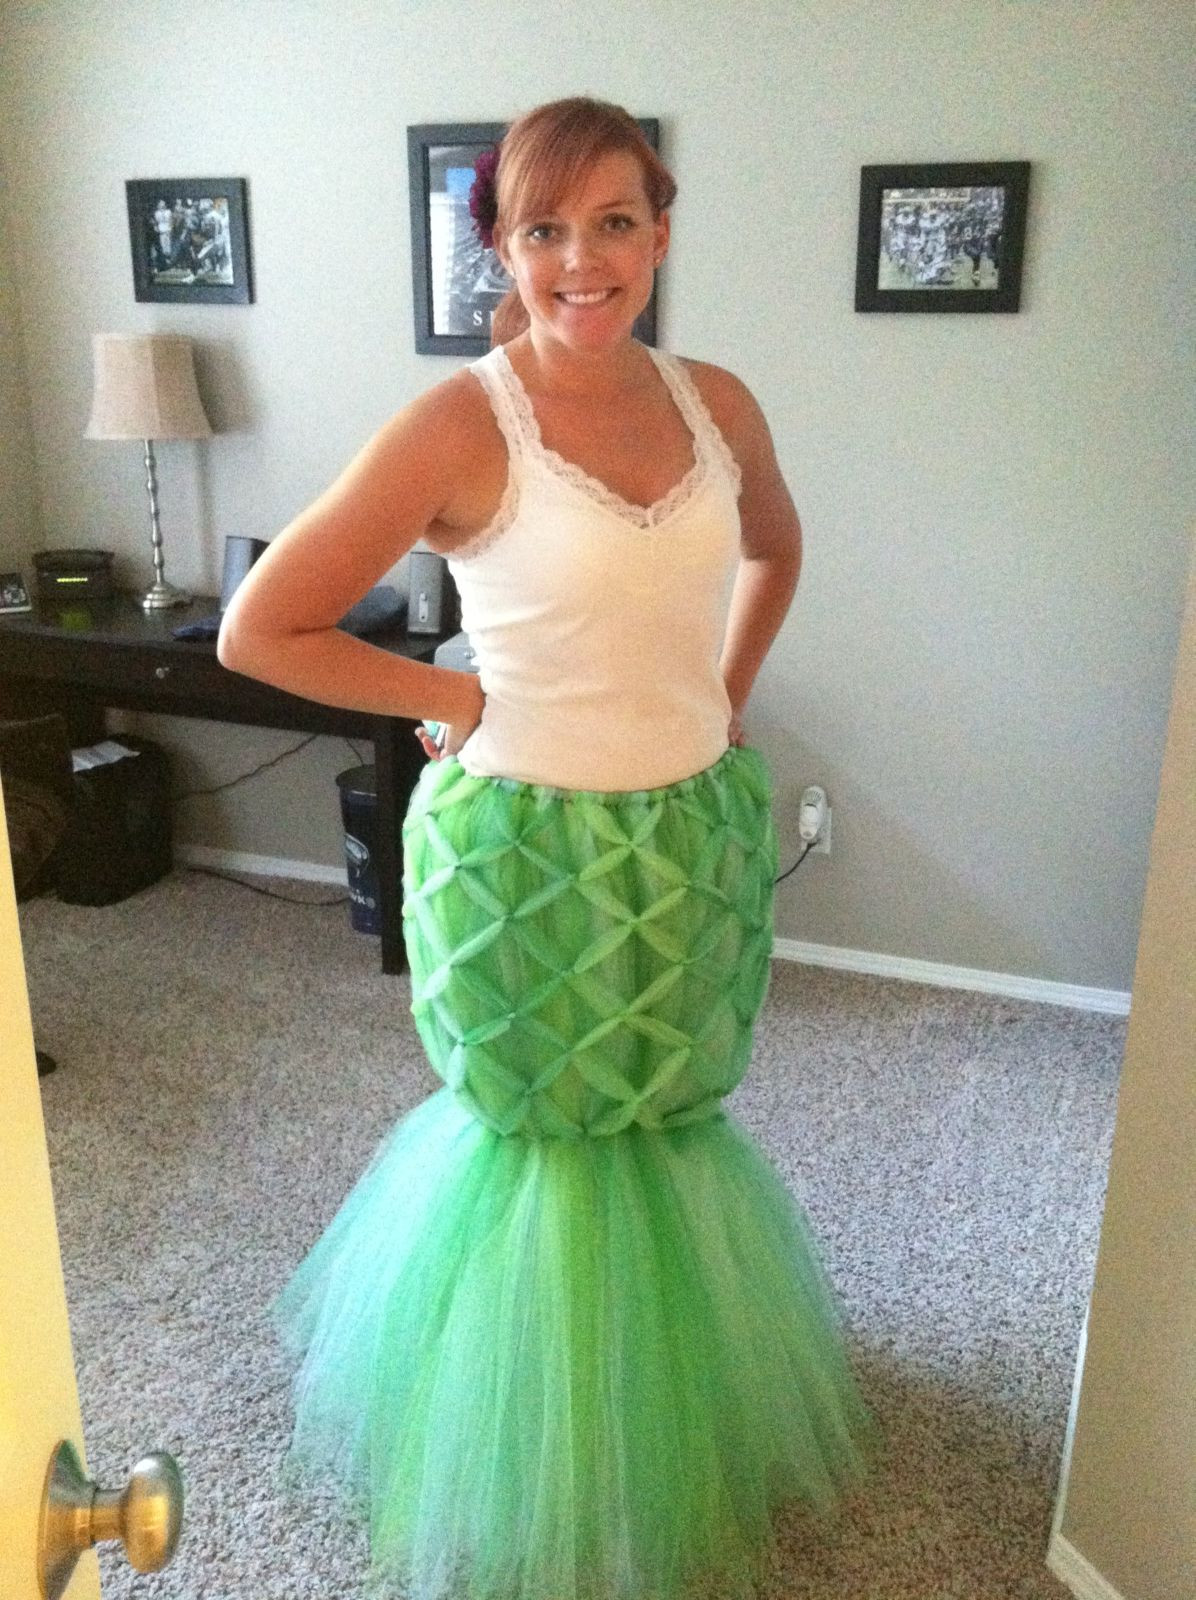 DIY Mermaid Skirt Costume
 Adult Tulle Mermaid costume Carson should so do this with